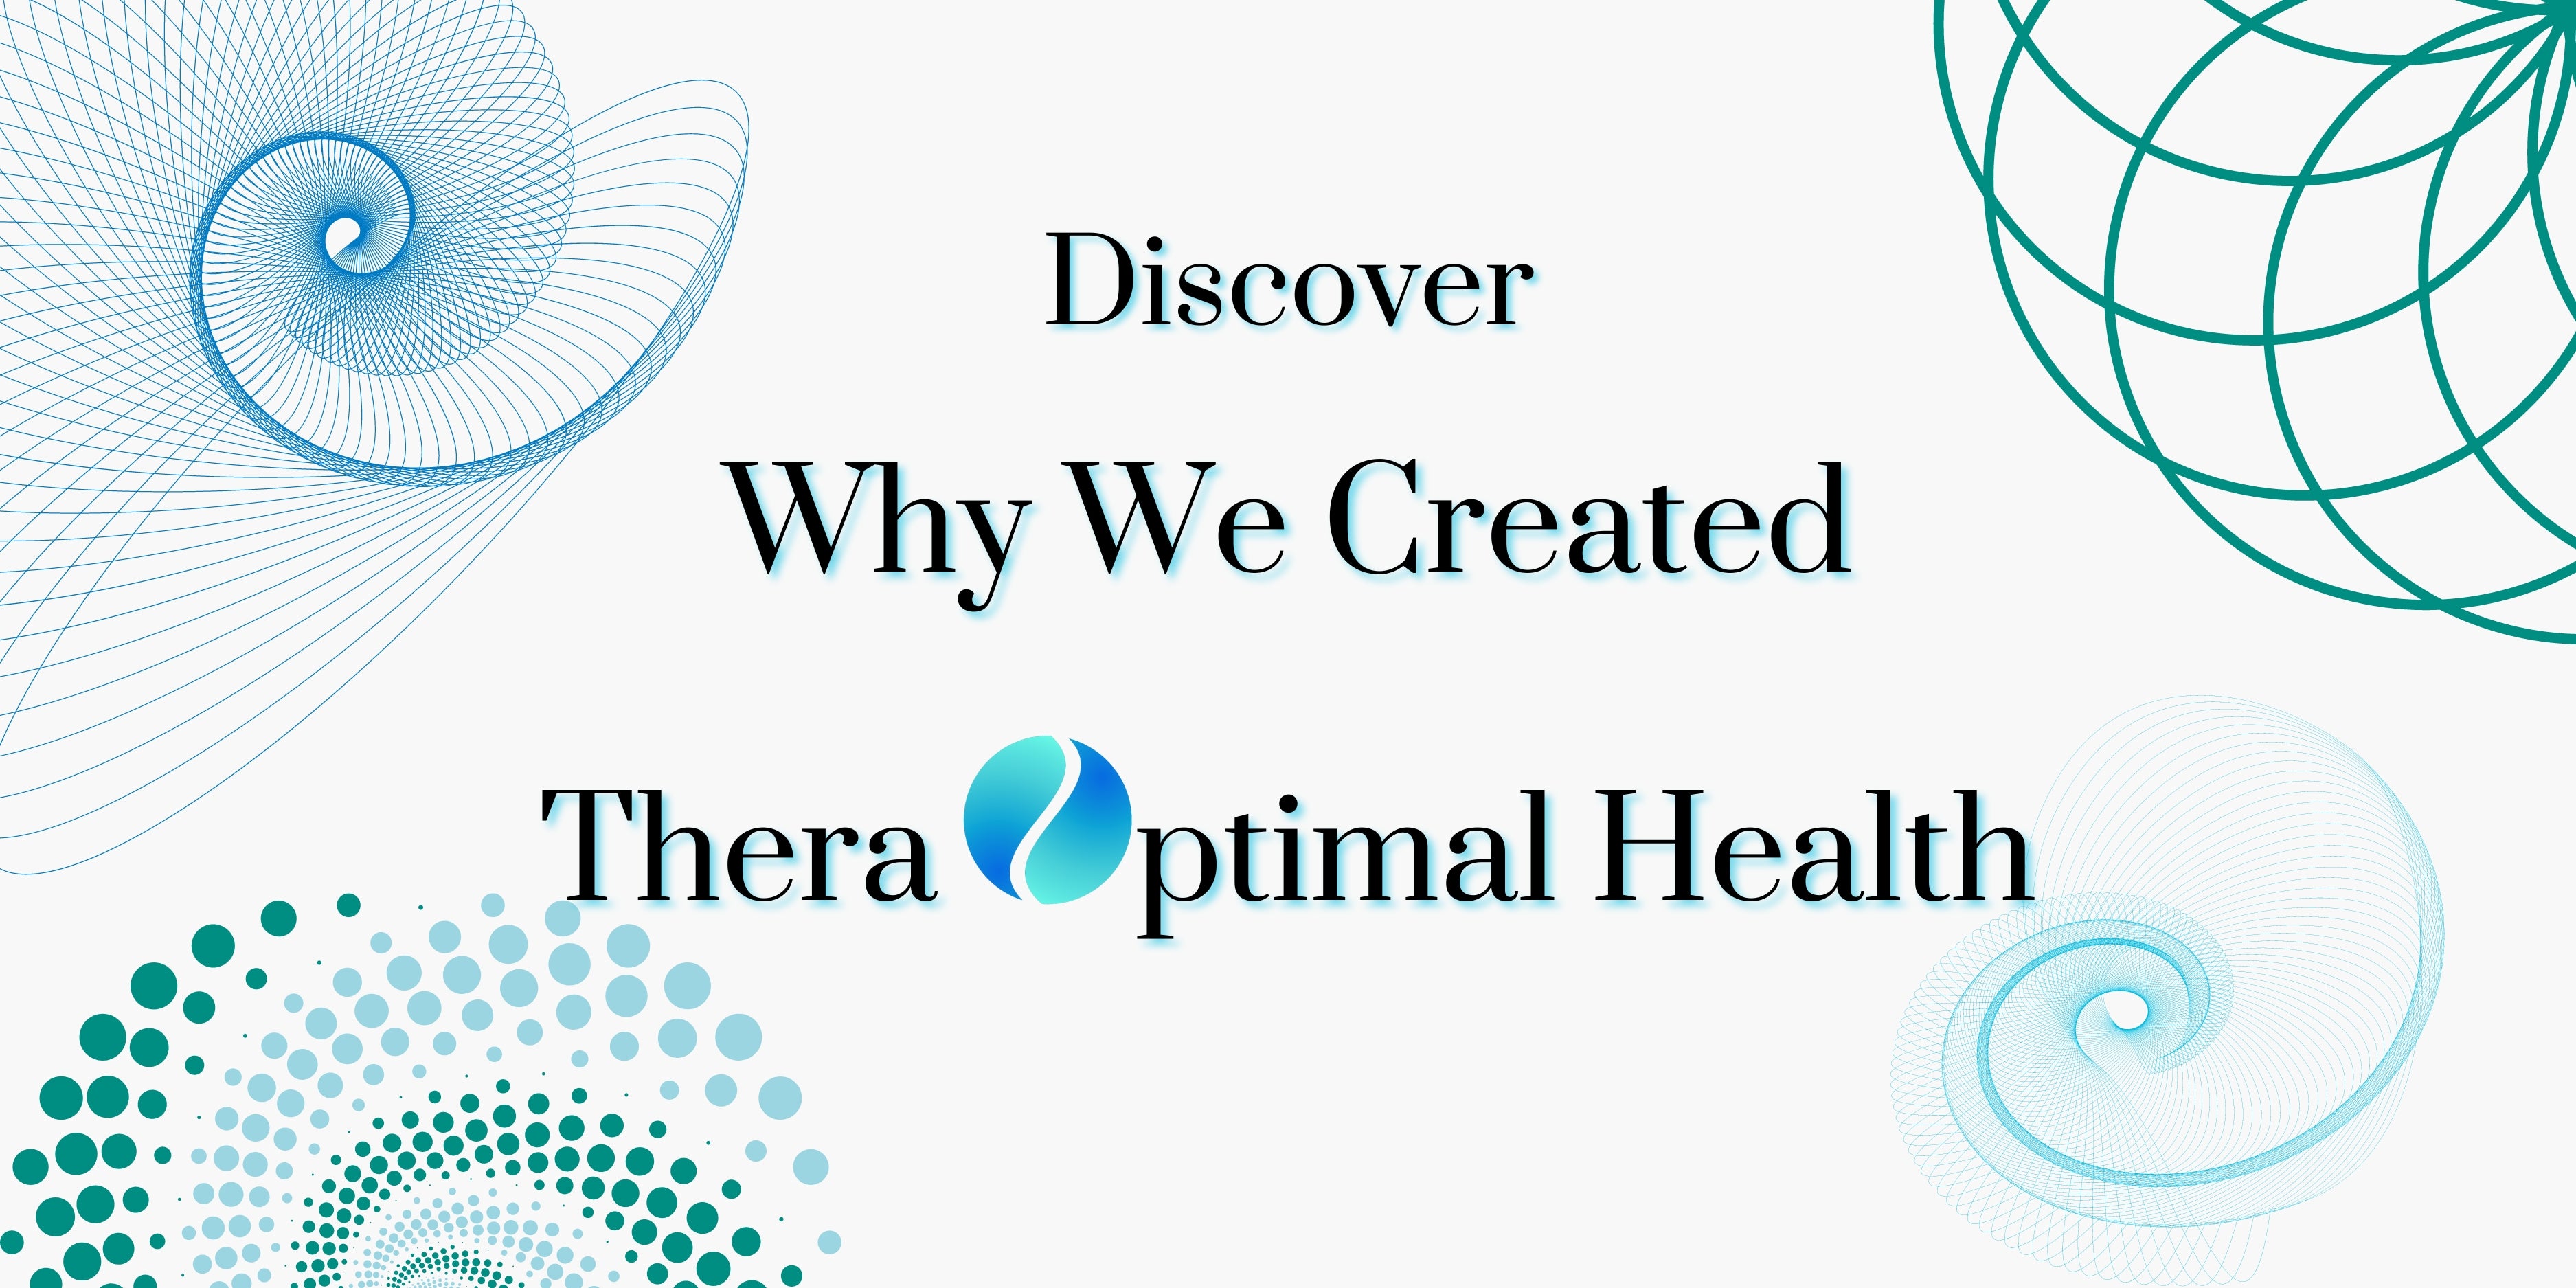 Load video: Why We Created Thera Optimal Health